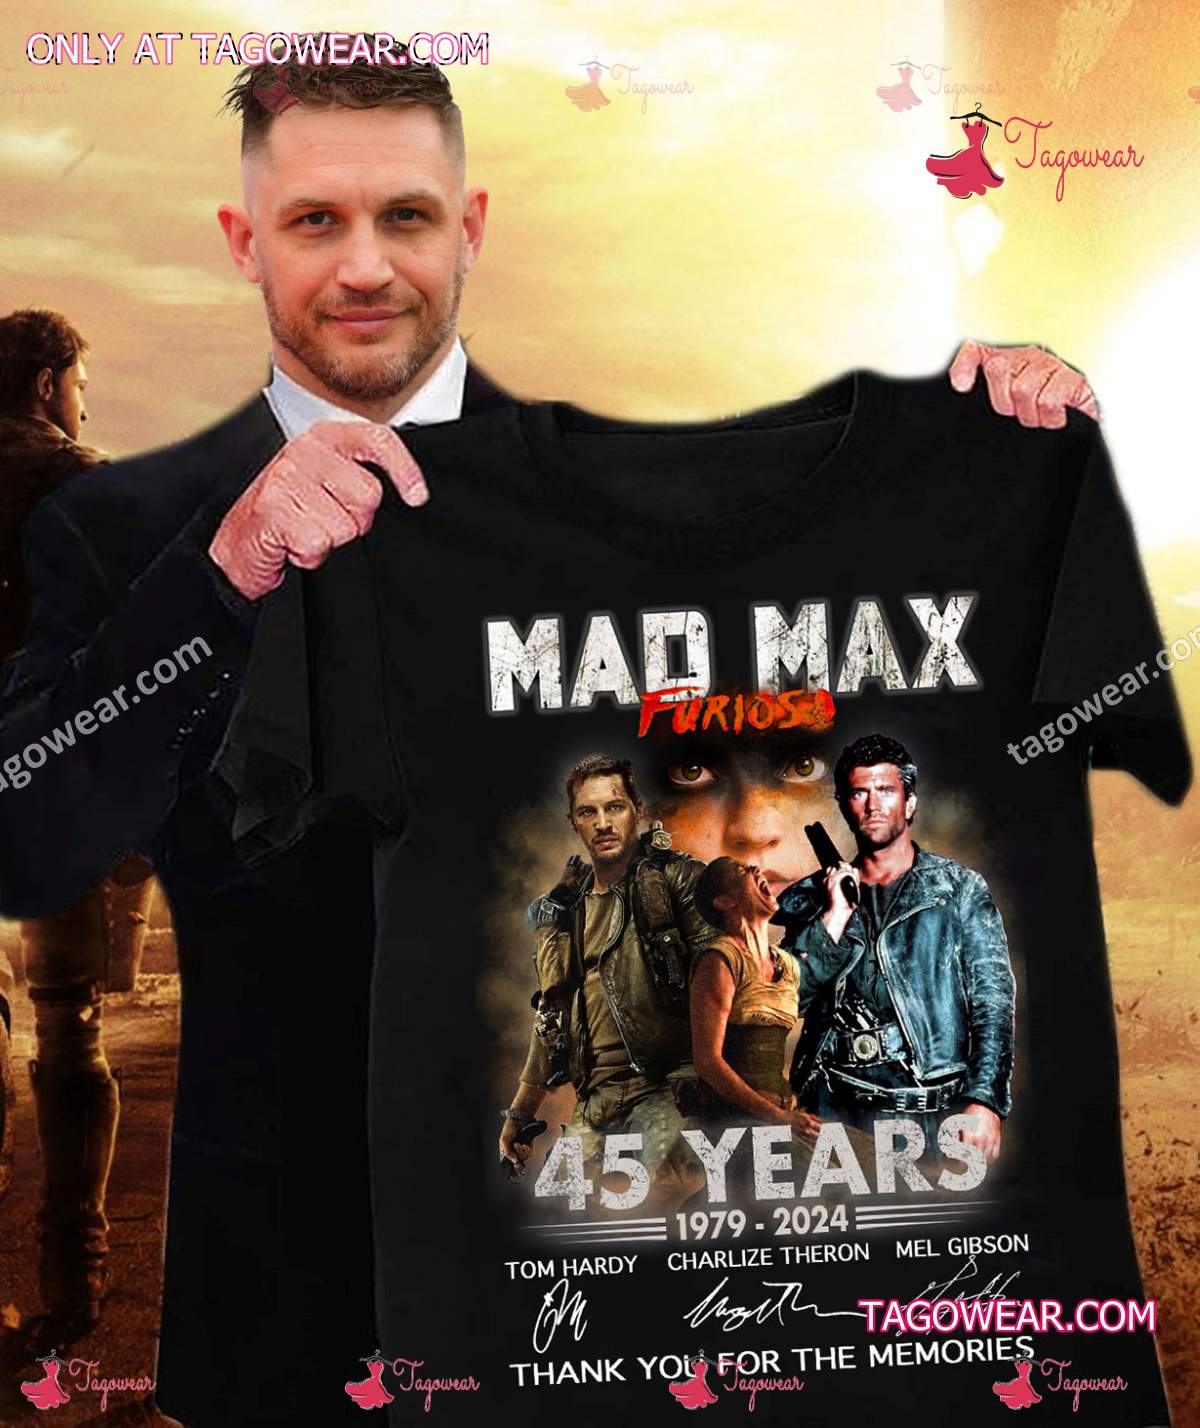 Mad Max Furiosa 45 Years 1979-2024 Signatures Thank You For The Memories Shirt